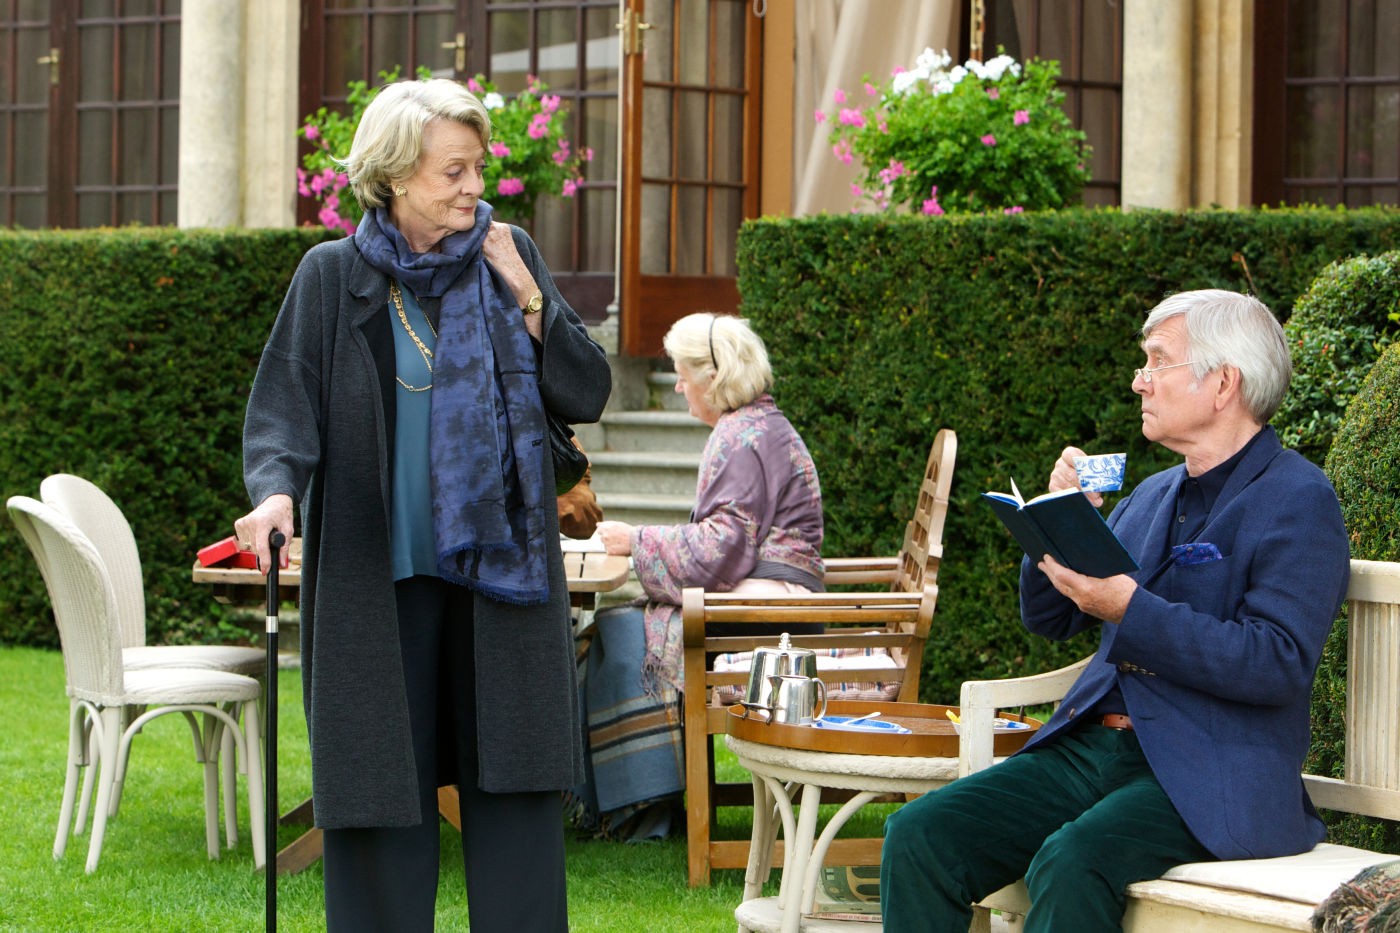 Maggie Smith stars as Jean Horton and Tom Courtenay stars as Reginald Paget in The Weinstein Company's Quartet (2013)